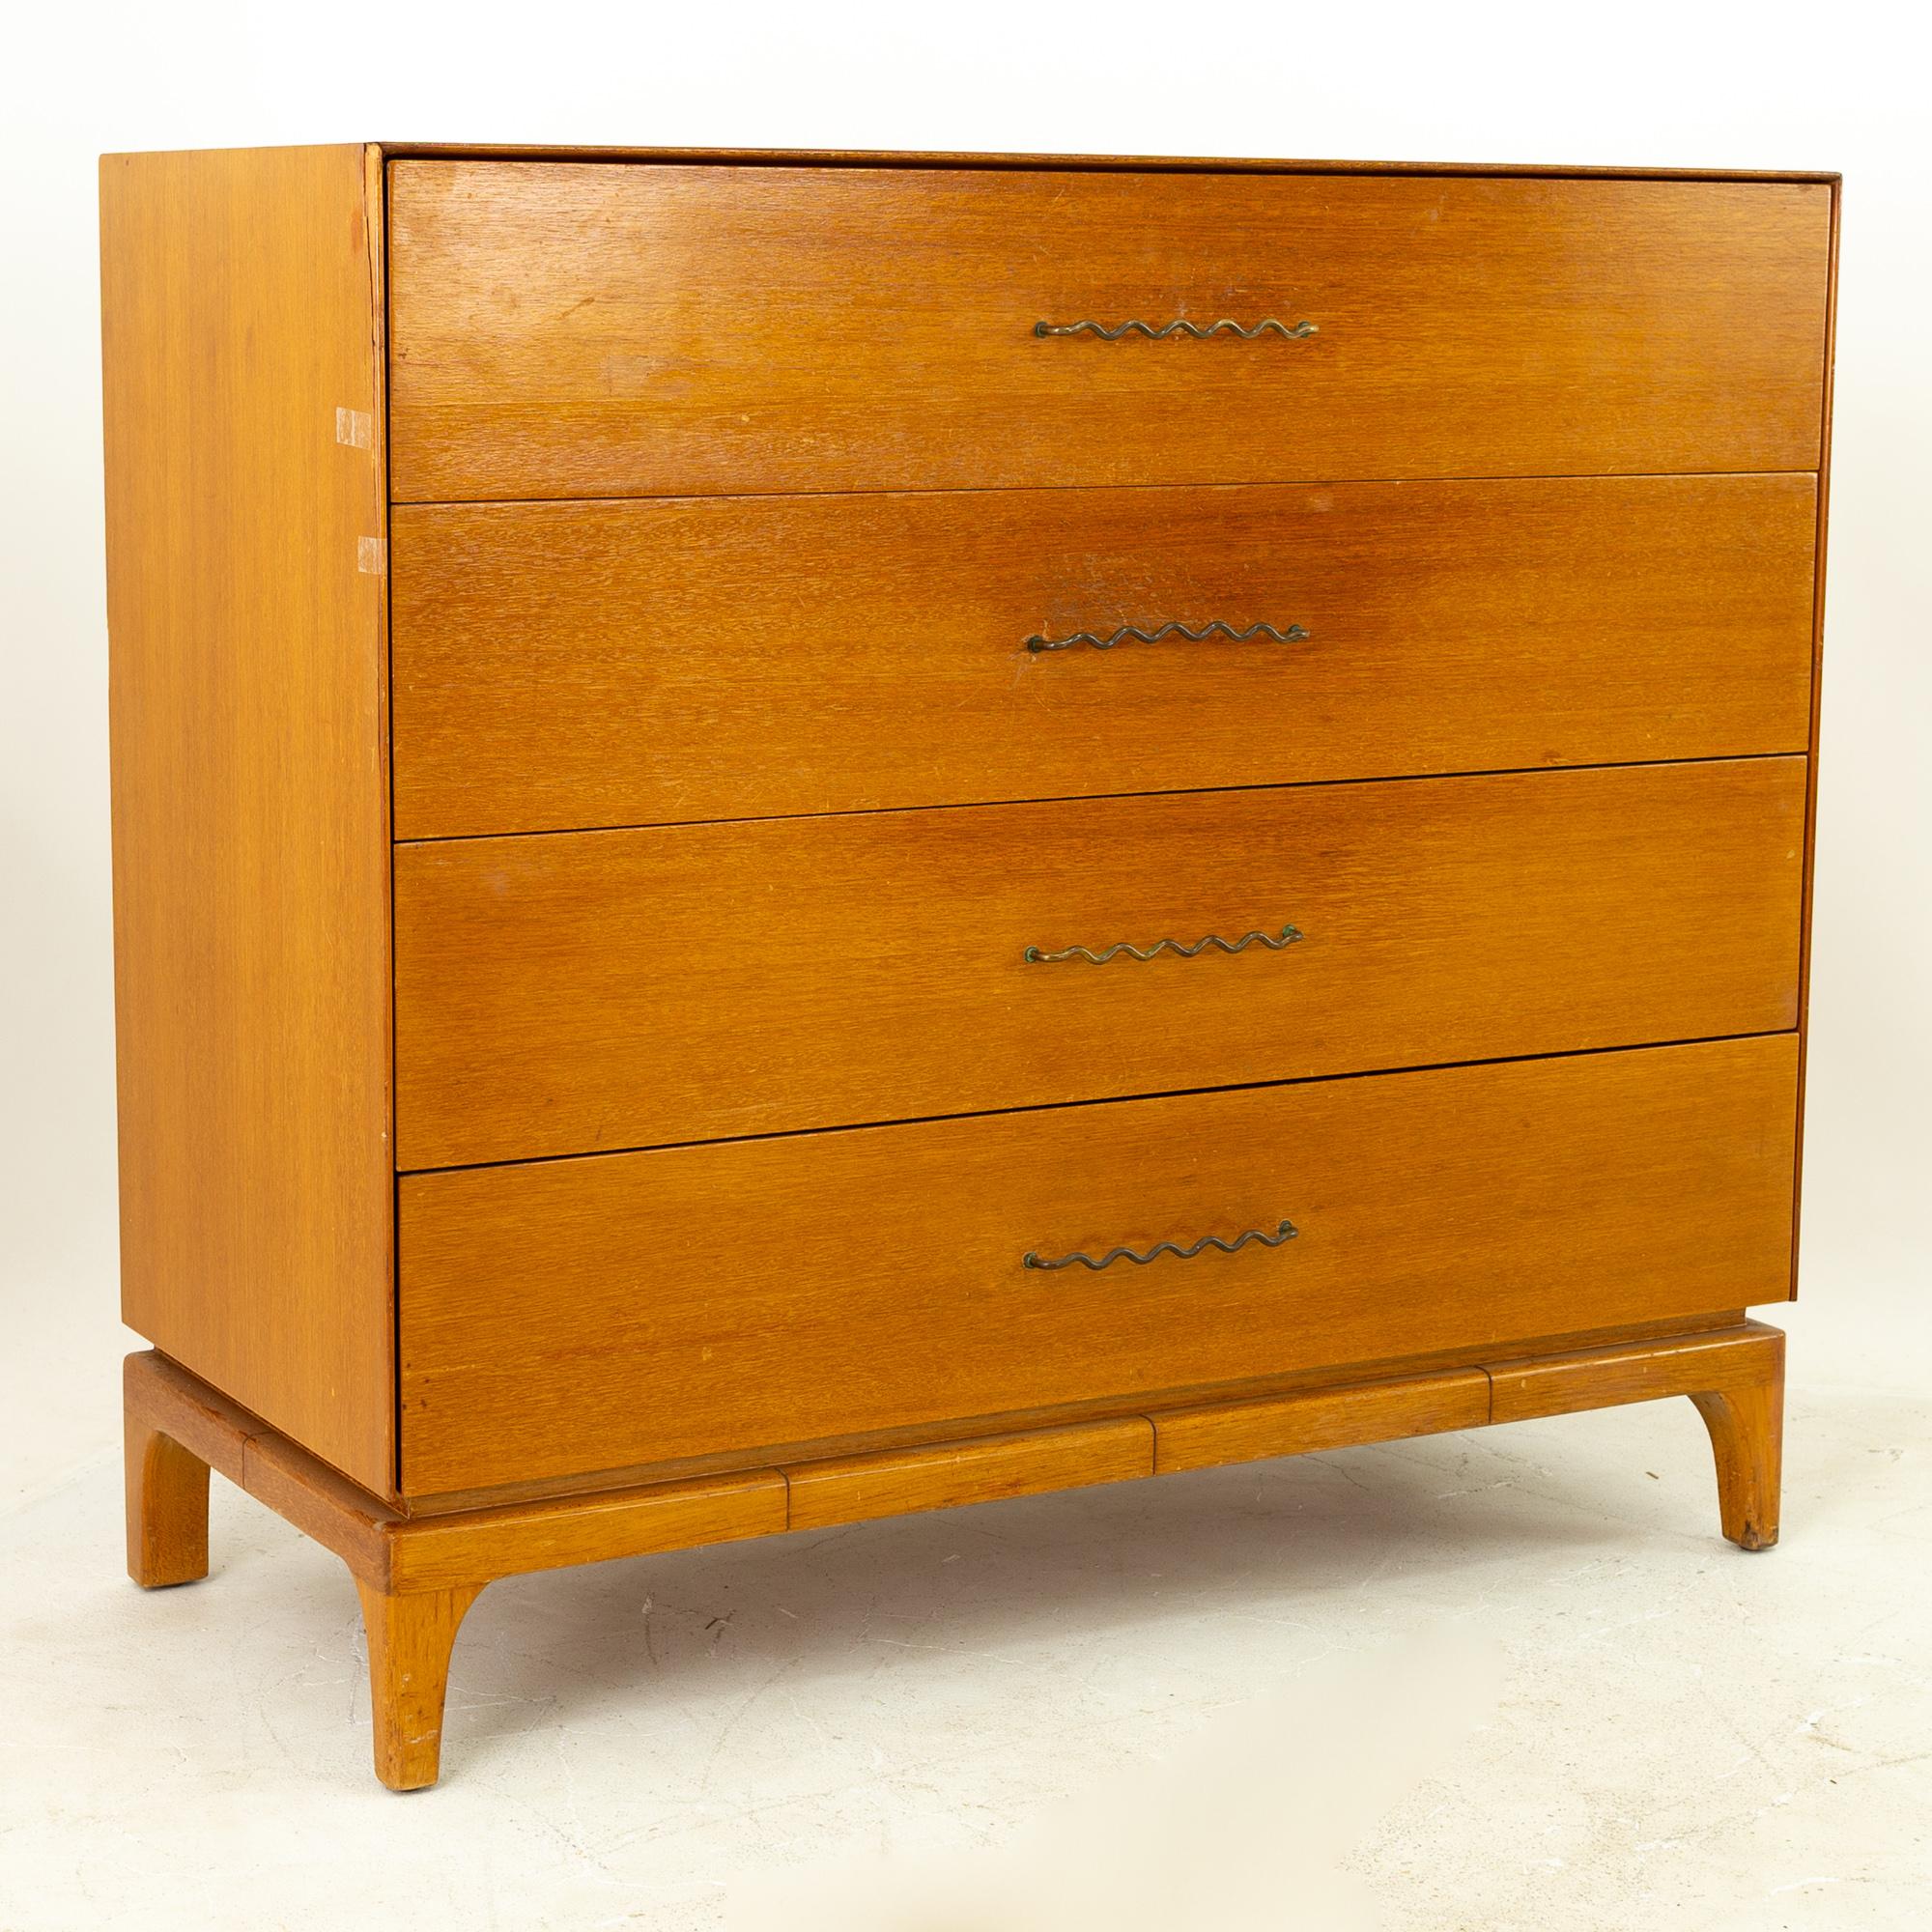 John Keal for Brown Saltman Mid Century mahogany 4-drawer highboy dresser 

Measures: 40 wide x 18 deep x 36.5 high

This price includes getting this piece in what we call restored vintage condition. That means the piece is permanently fixed upon